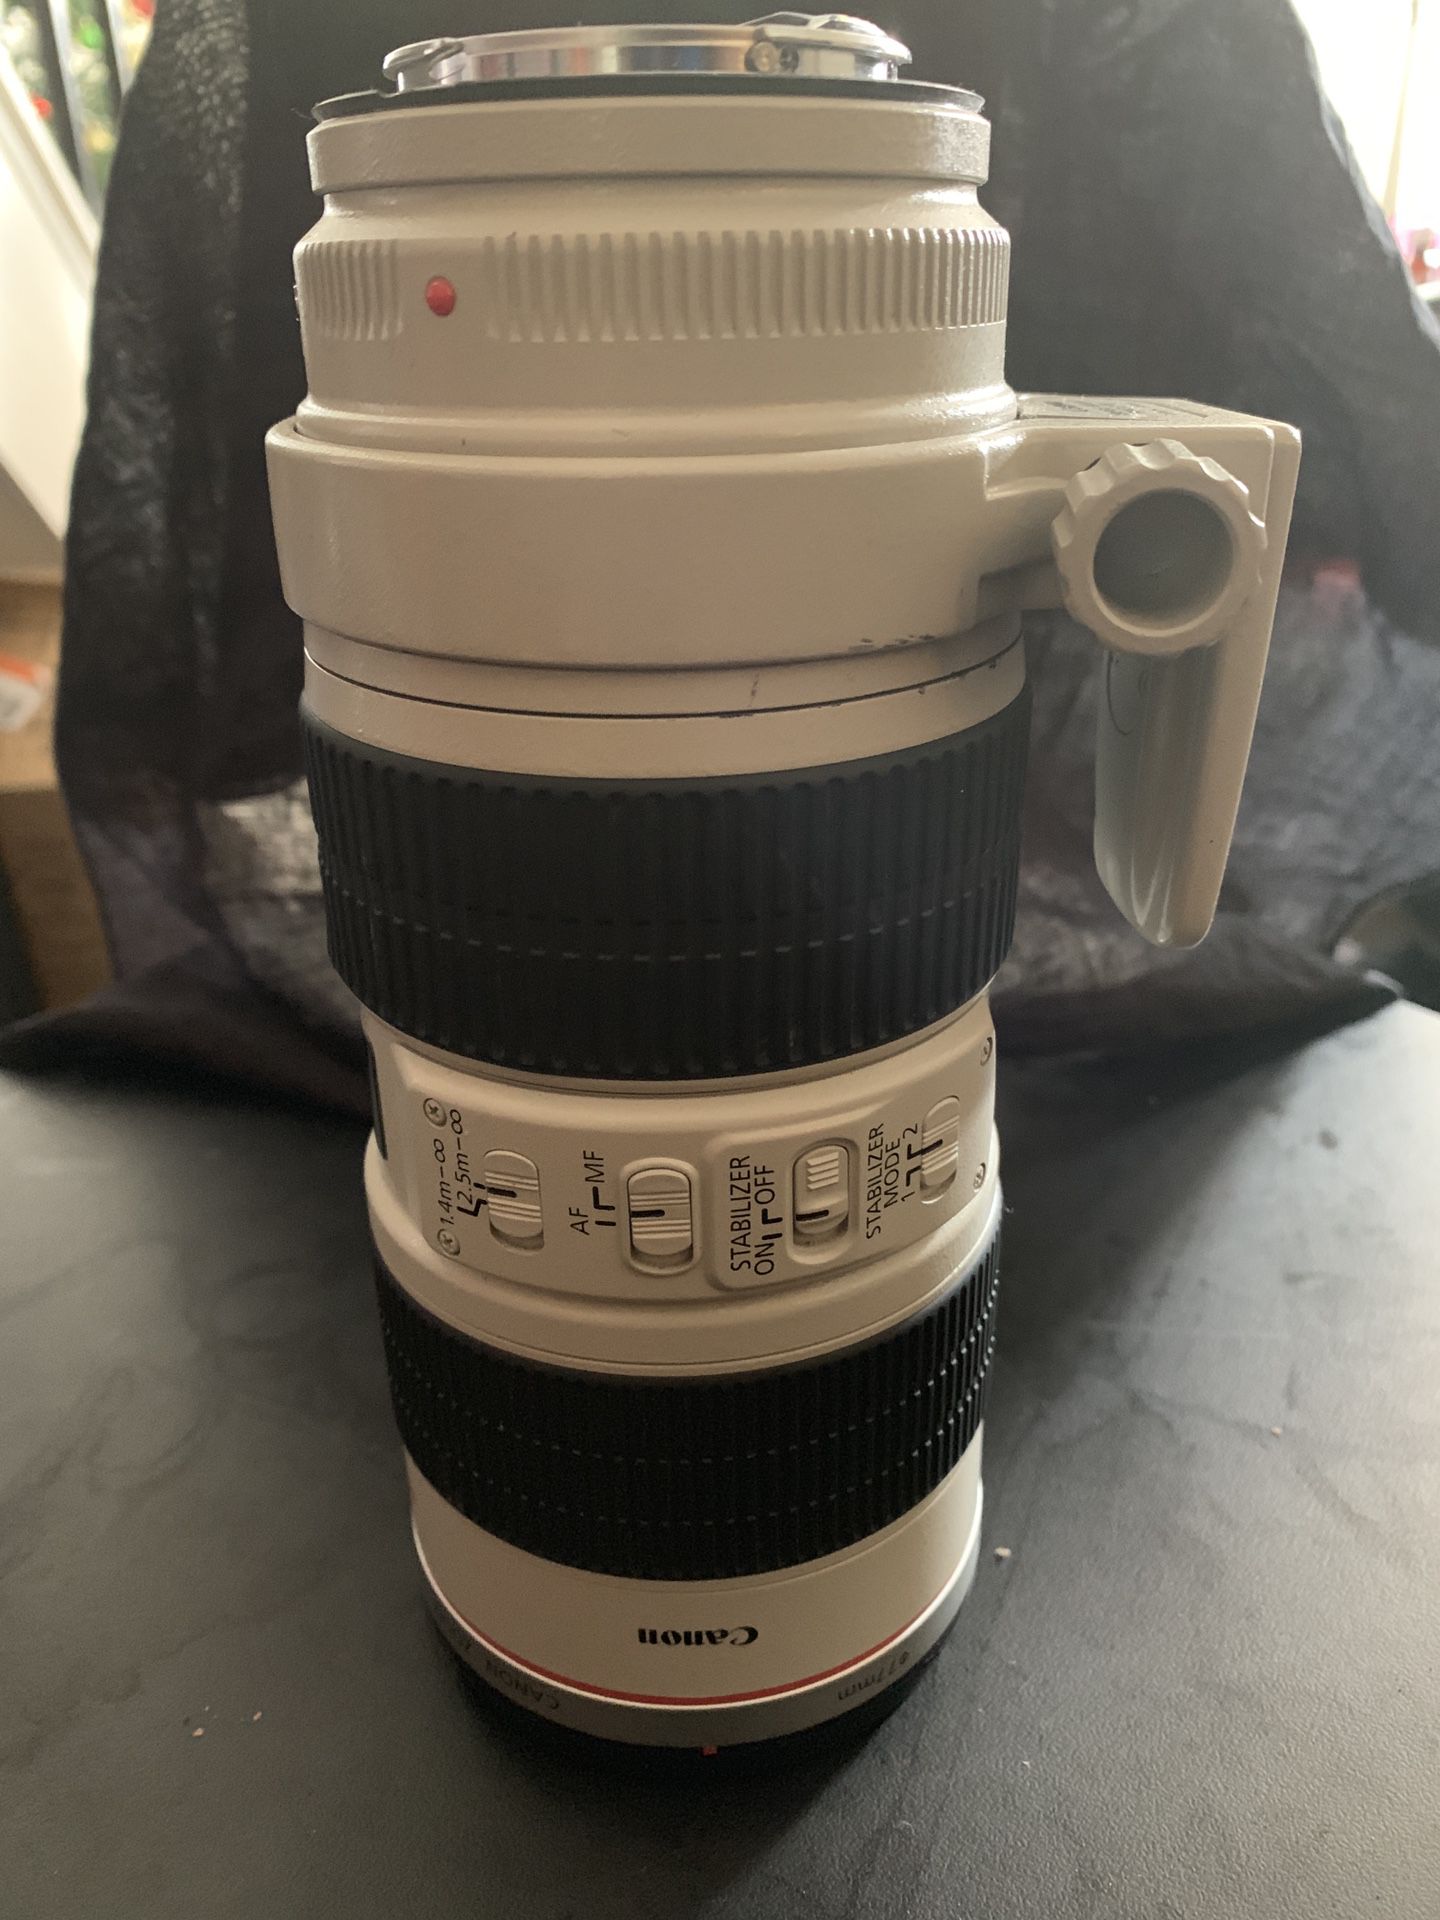 Canon 70-200 2.8 L IS. (Broken) selling for parts.